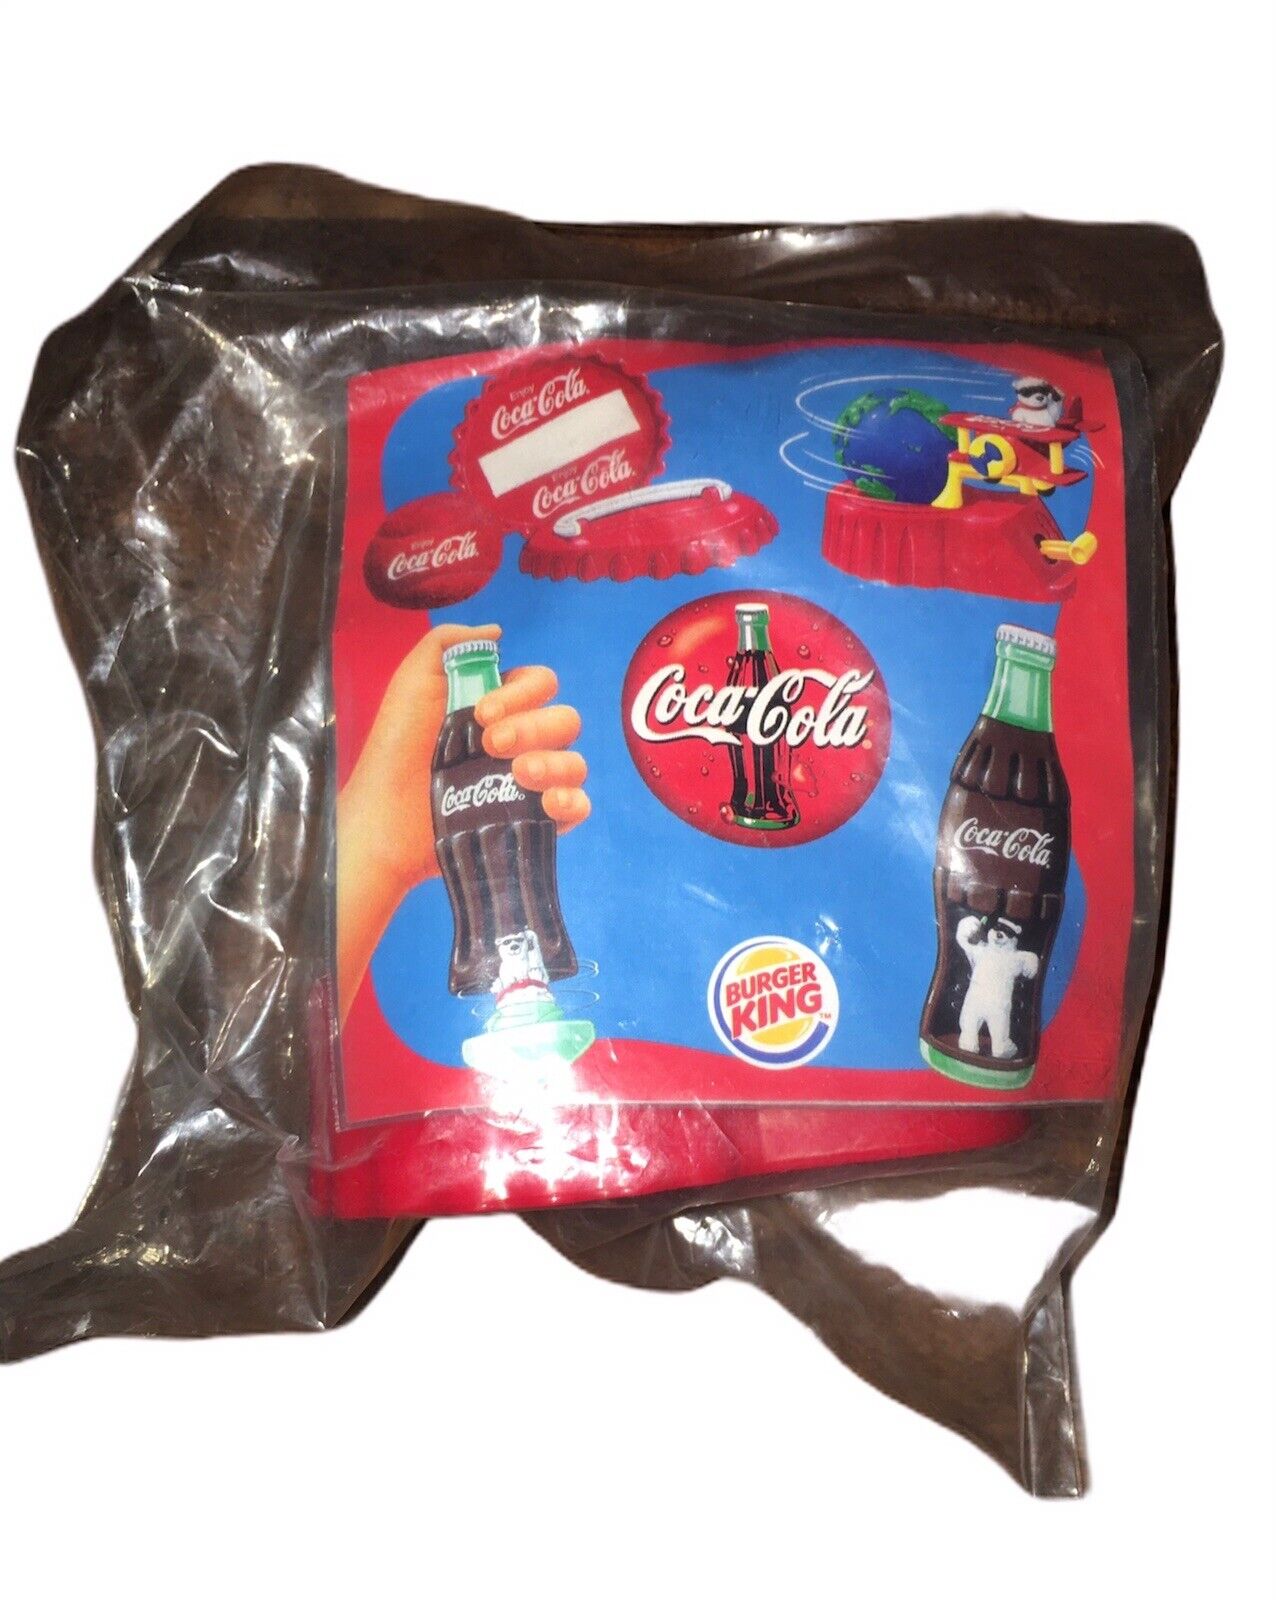 Vintage Coca-Cola Burger King Toys from 2000